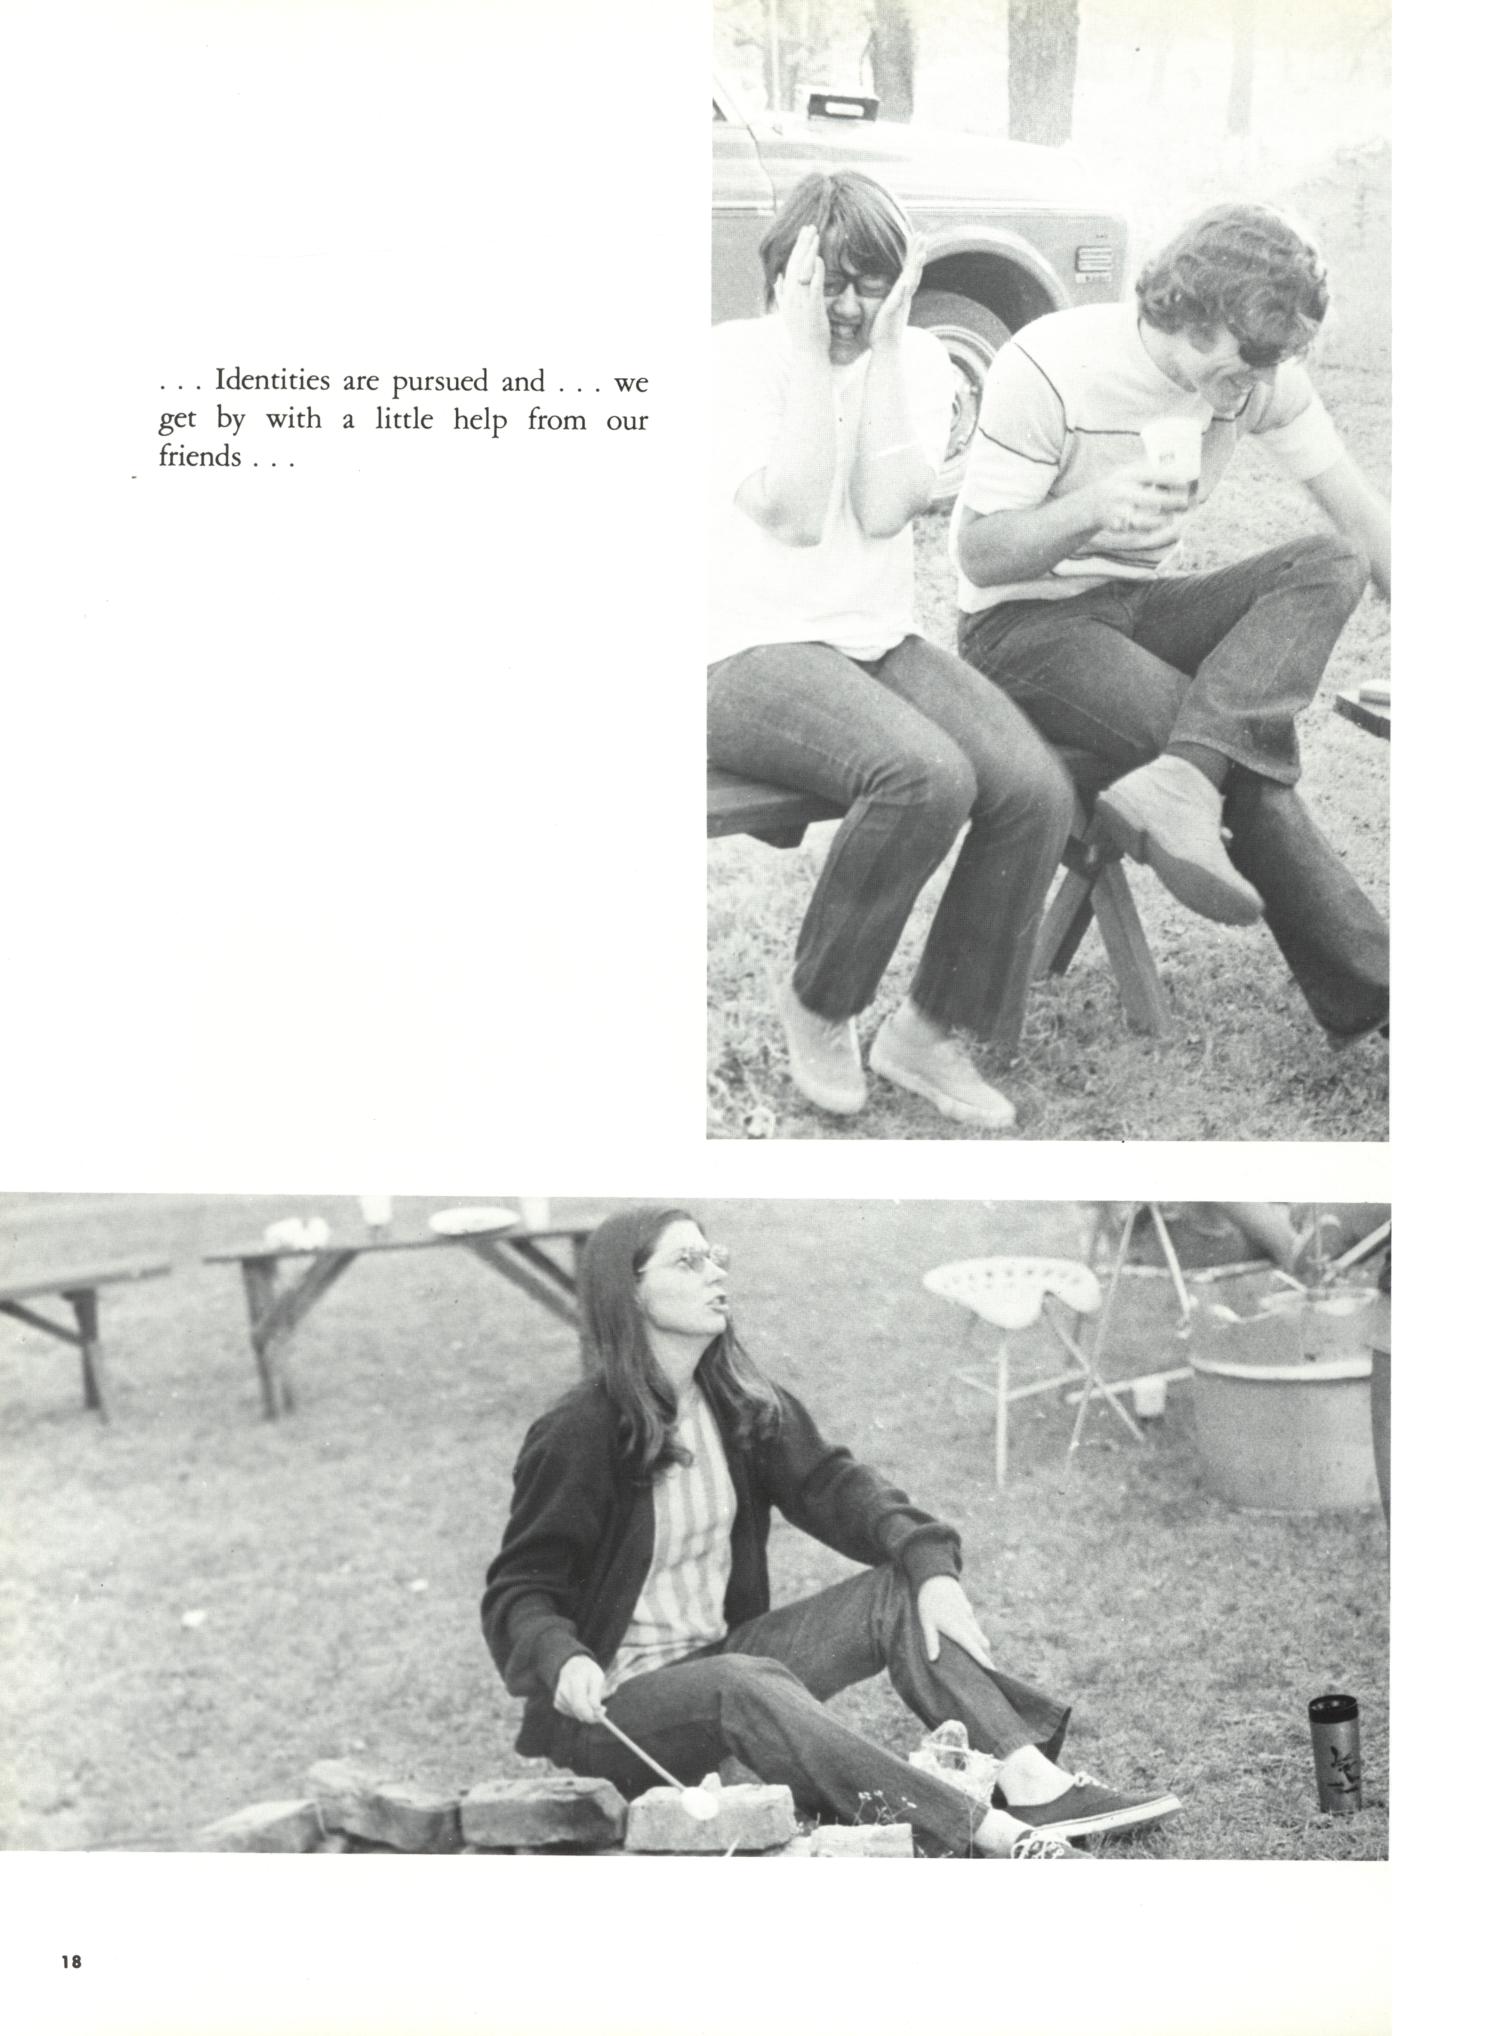 The Grassburr, Yearbook of Tarleton State College, 1971
                                                
                                                    18
                                                